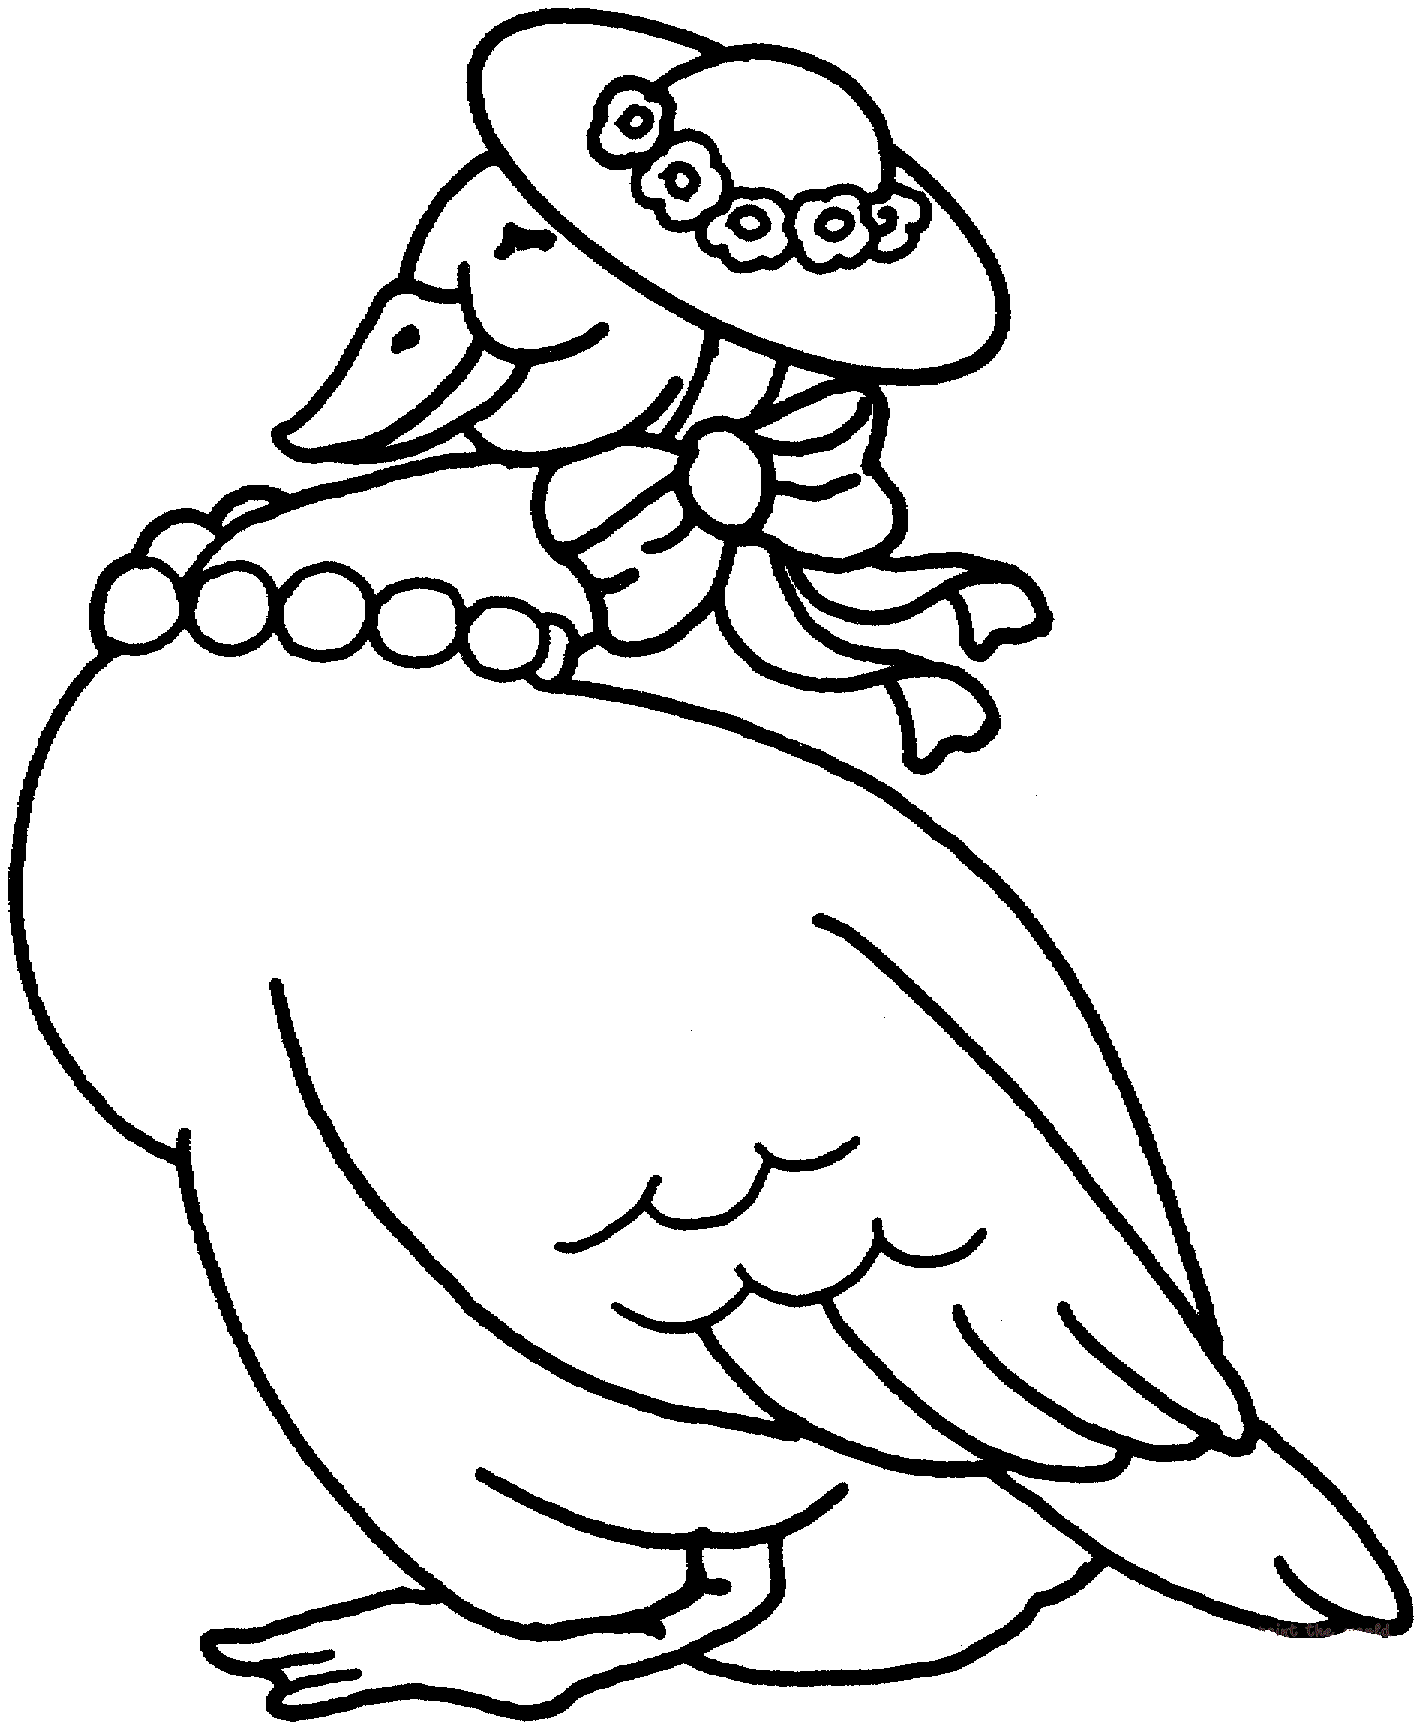 Duck wearing hat and pearl necklace Coloring Page